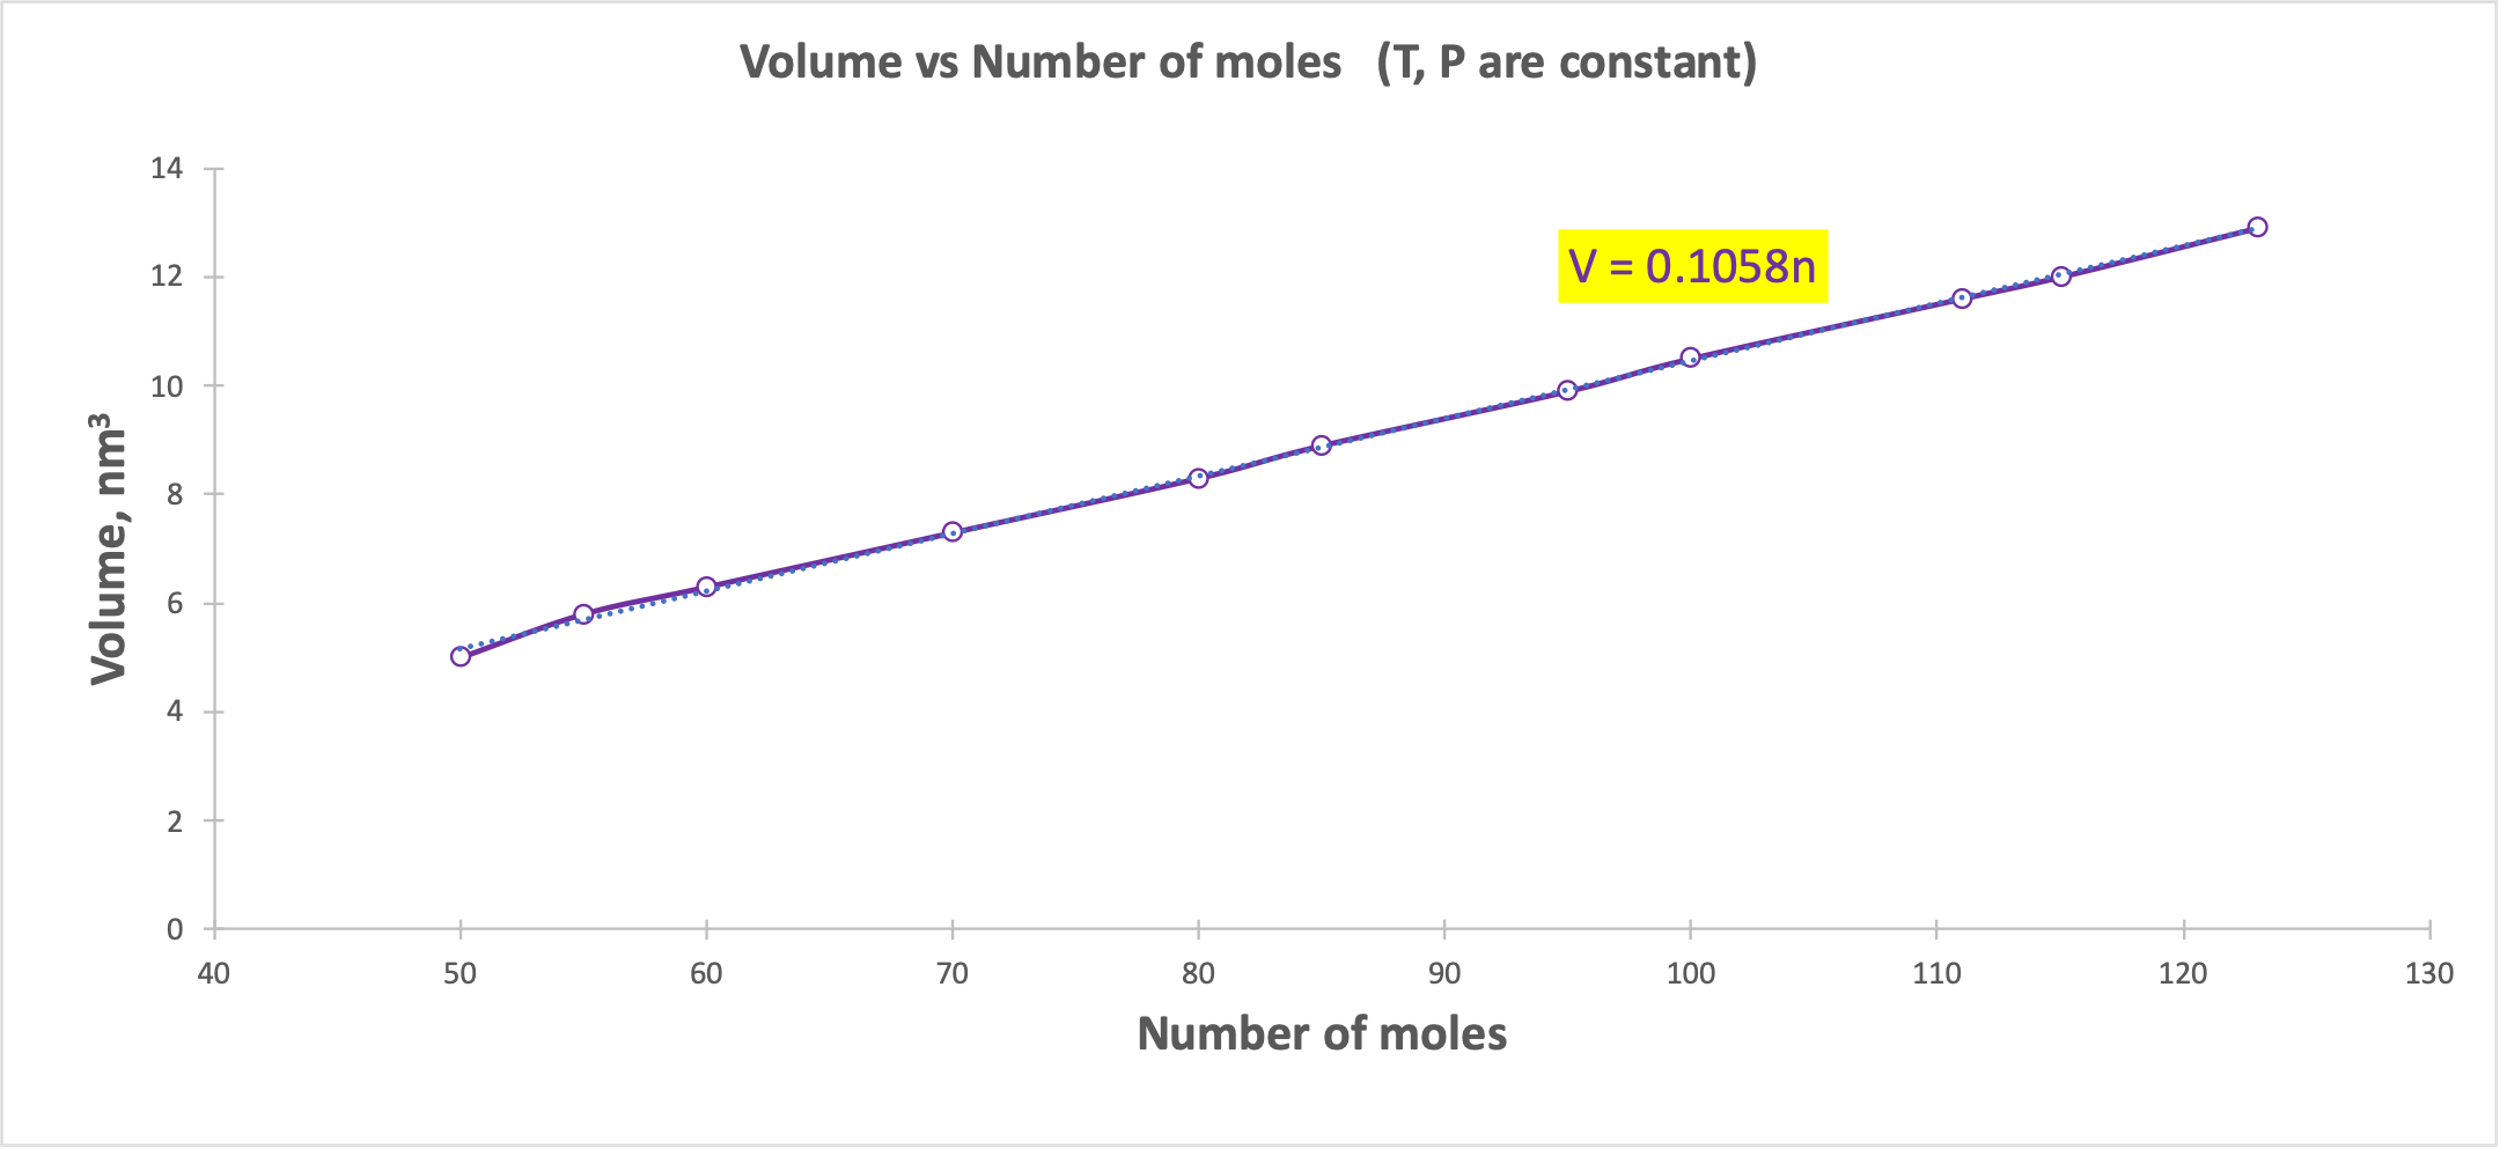 Dependence of volume on the number of moles at constant pressure and temperature